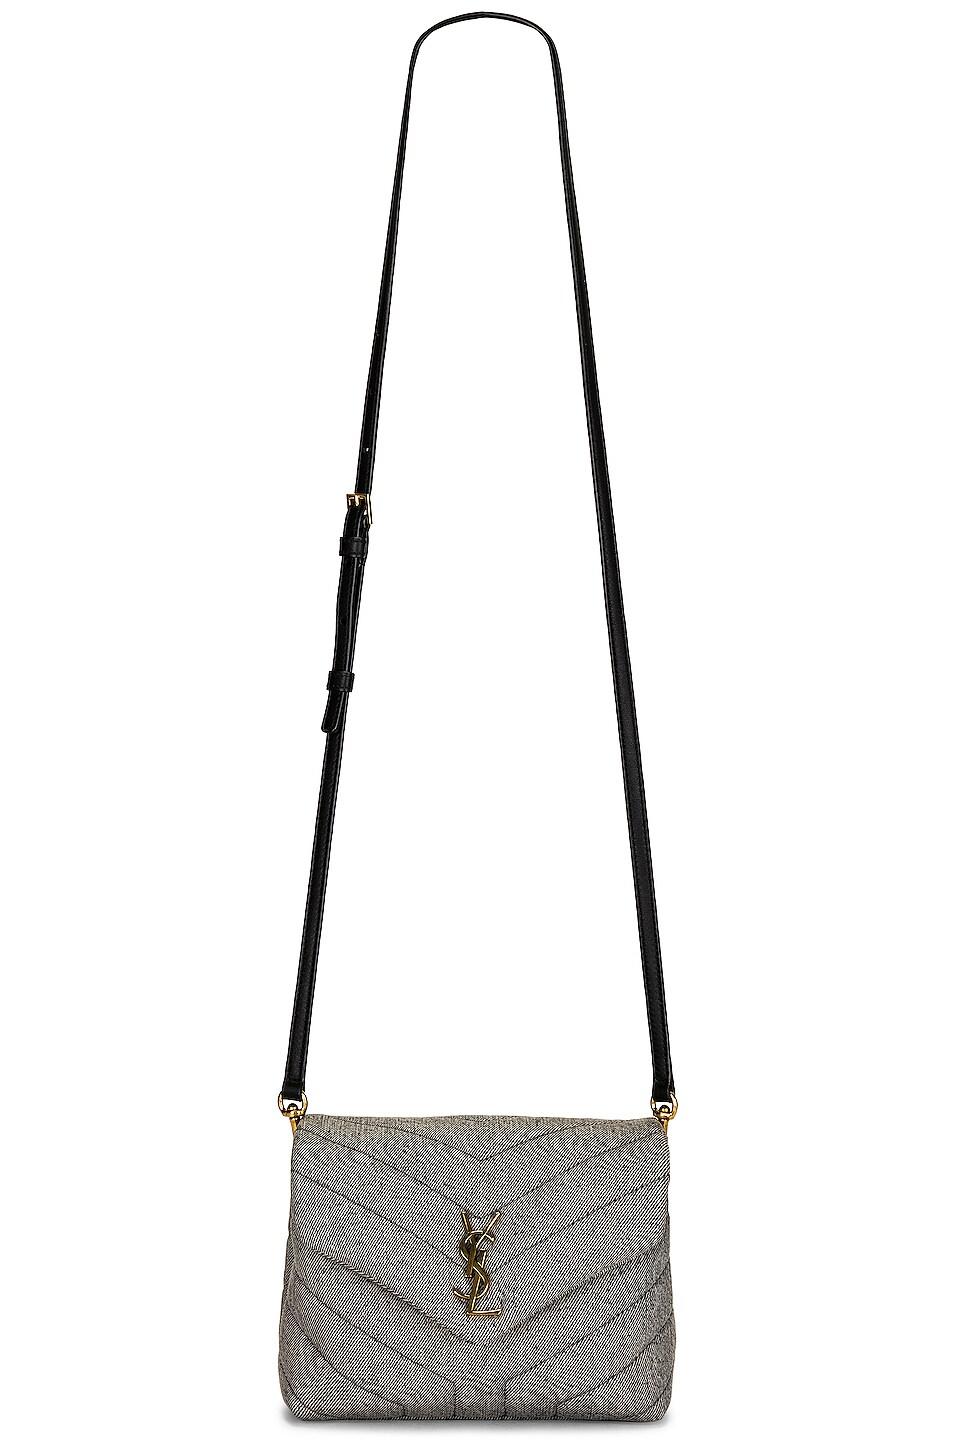 Saint Laurent Toy Loulou Crossbody Bag in Gray | Lyst